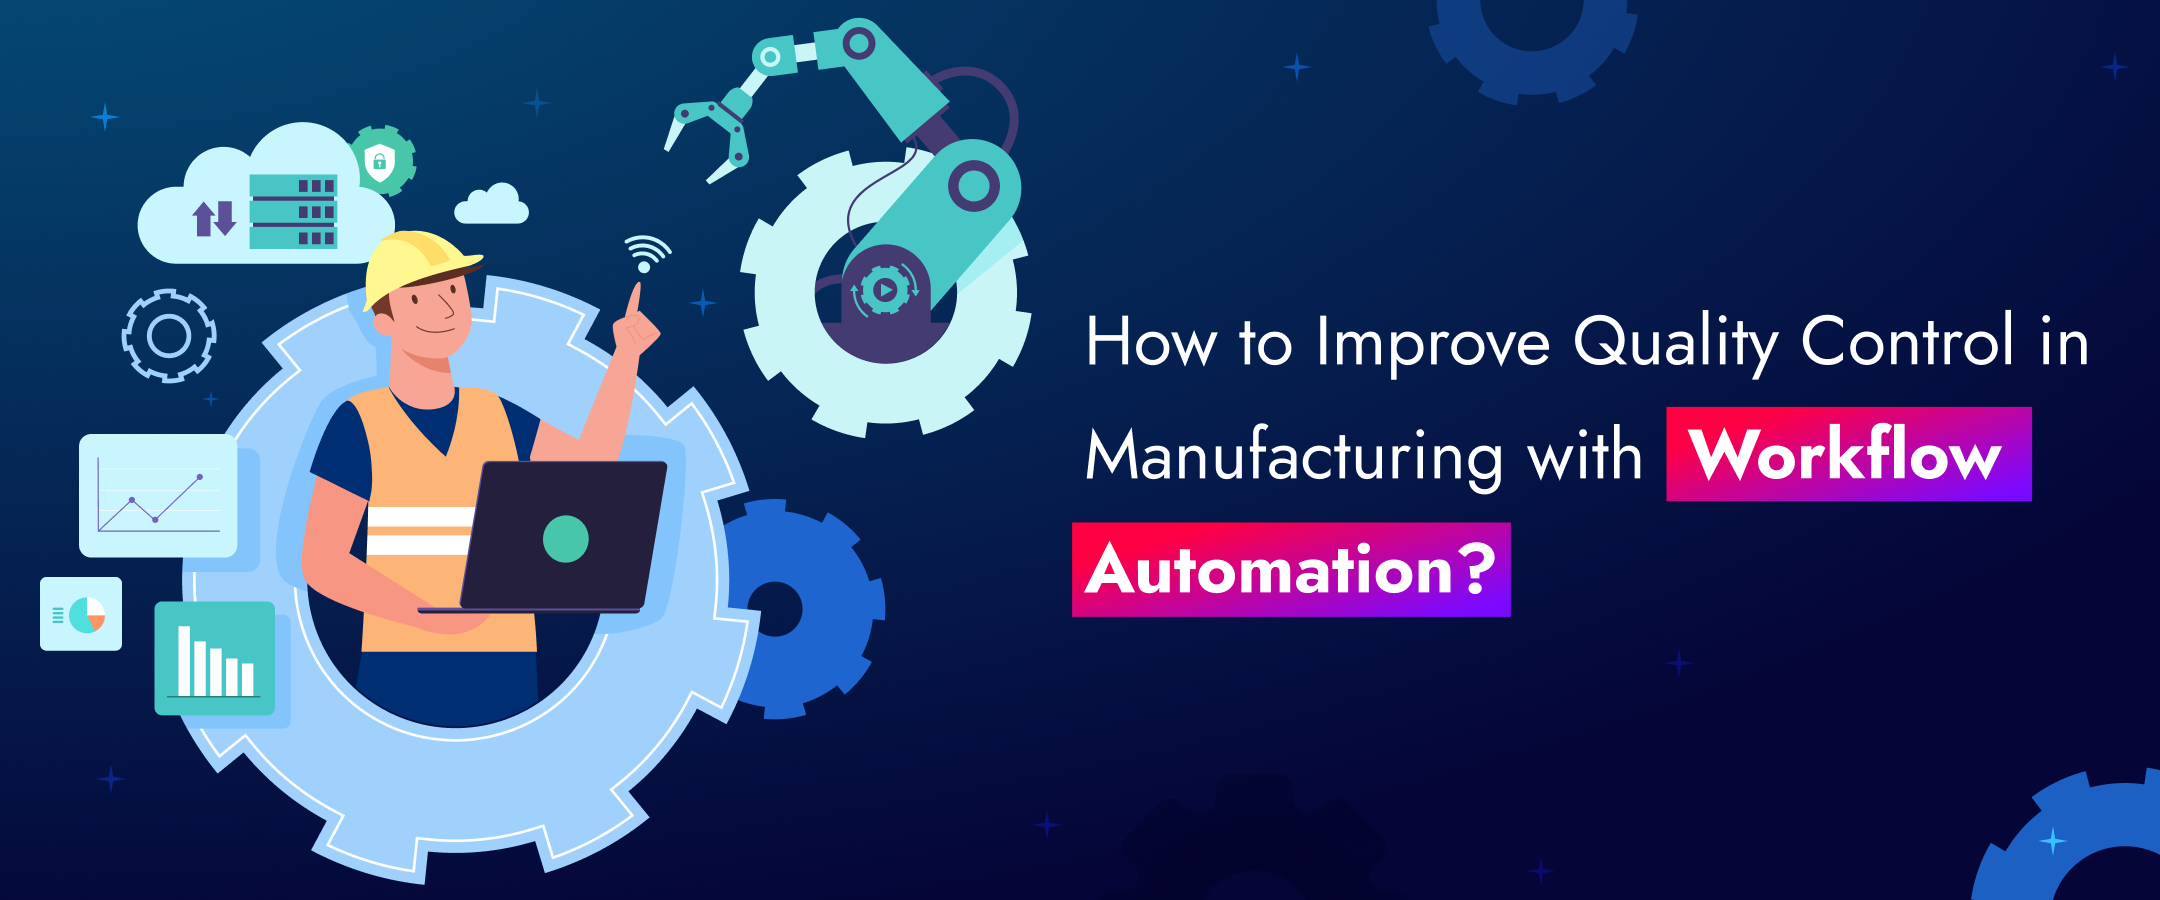 How to Improve Quality Control in Manufacturing with Workflow Automation?